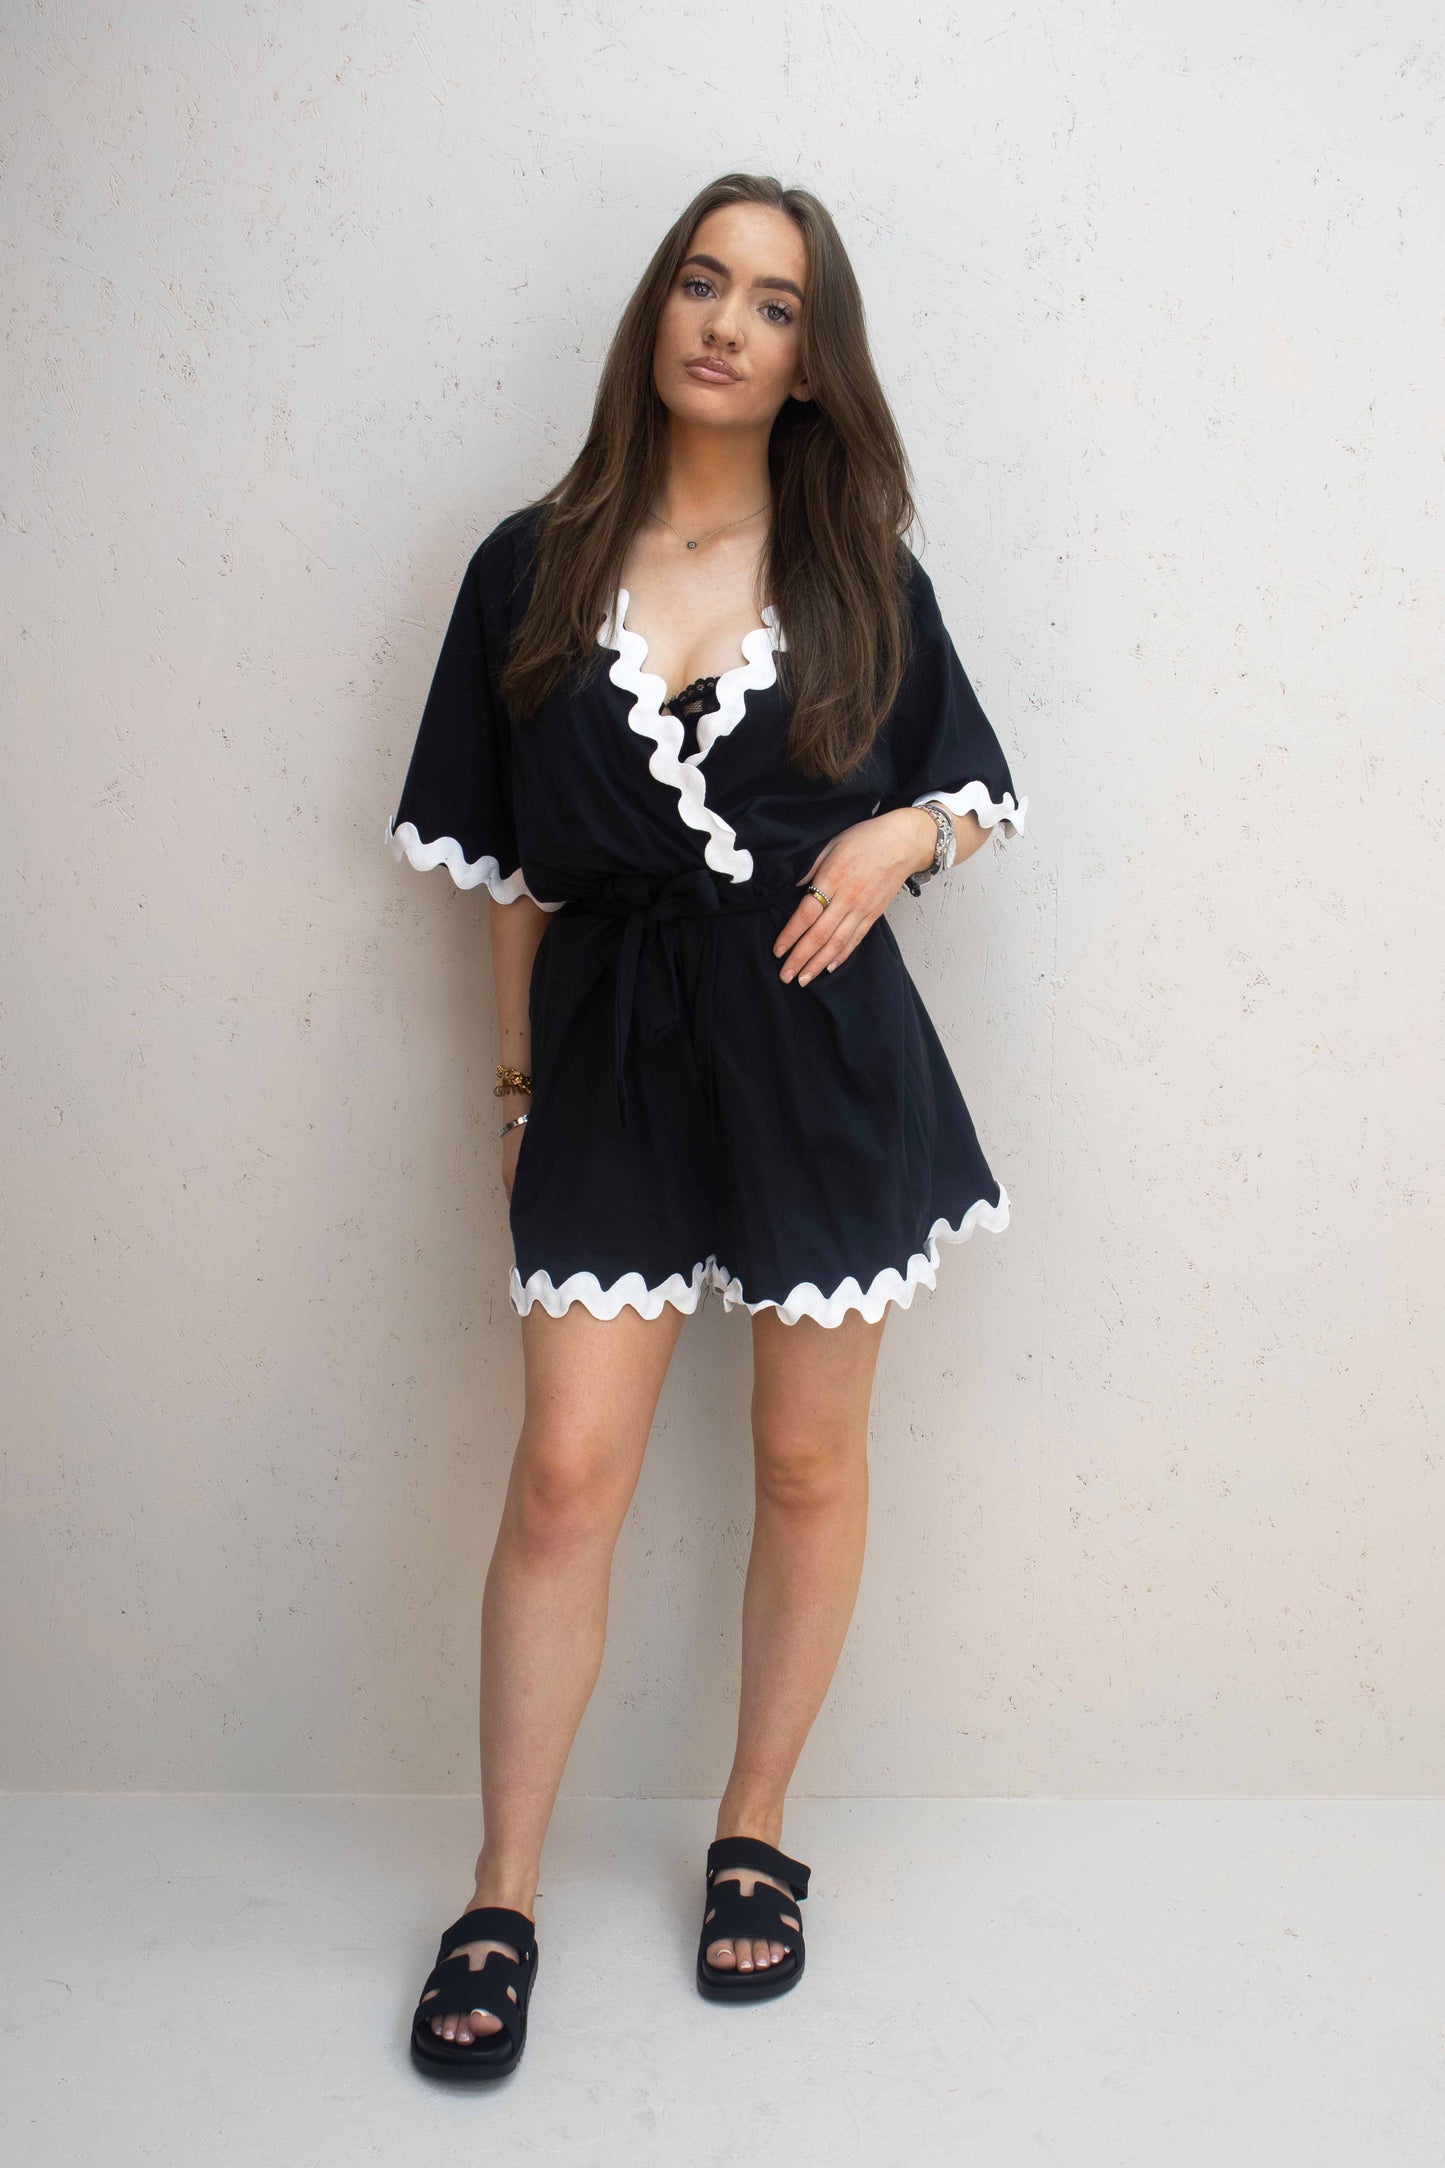 Lady wearing black coloured playsuit with white wavey piping design, complimenting the clothing with a pair of black chunky slip on sliders